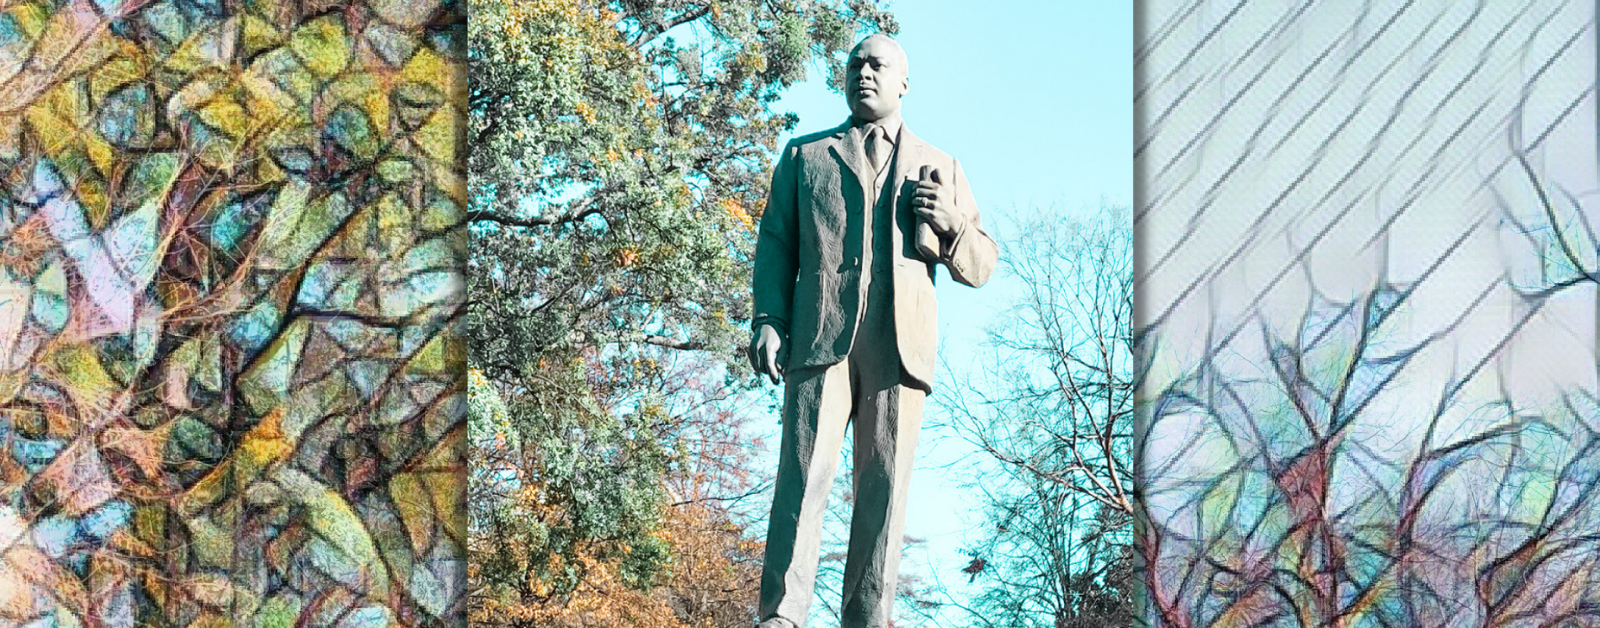 statue in a park of Martin Luther King Jr standing holding a Bible